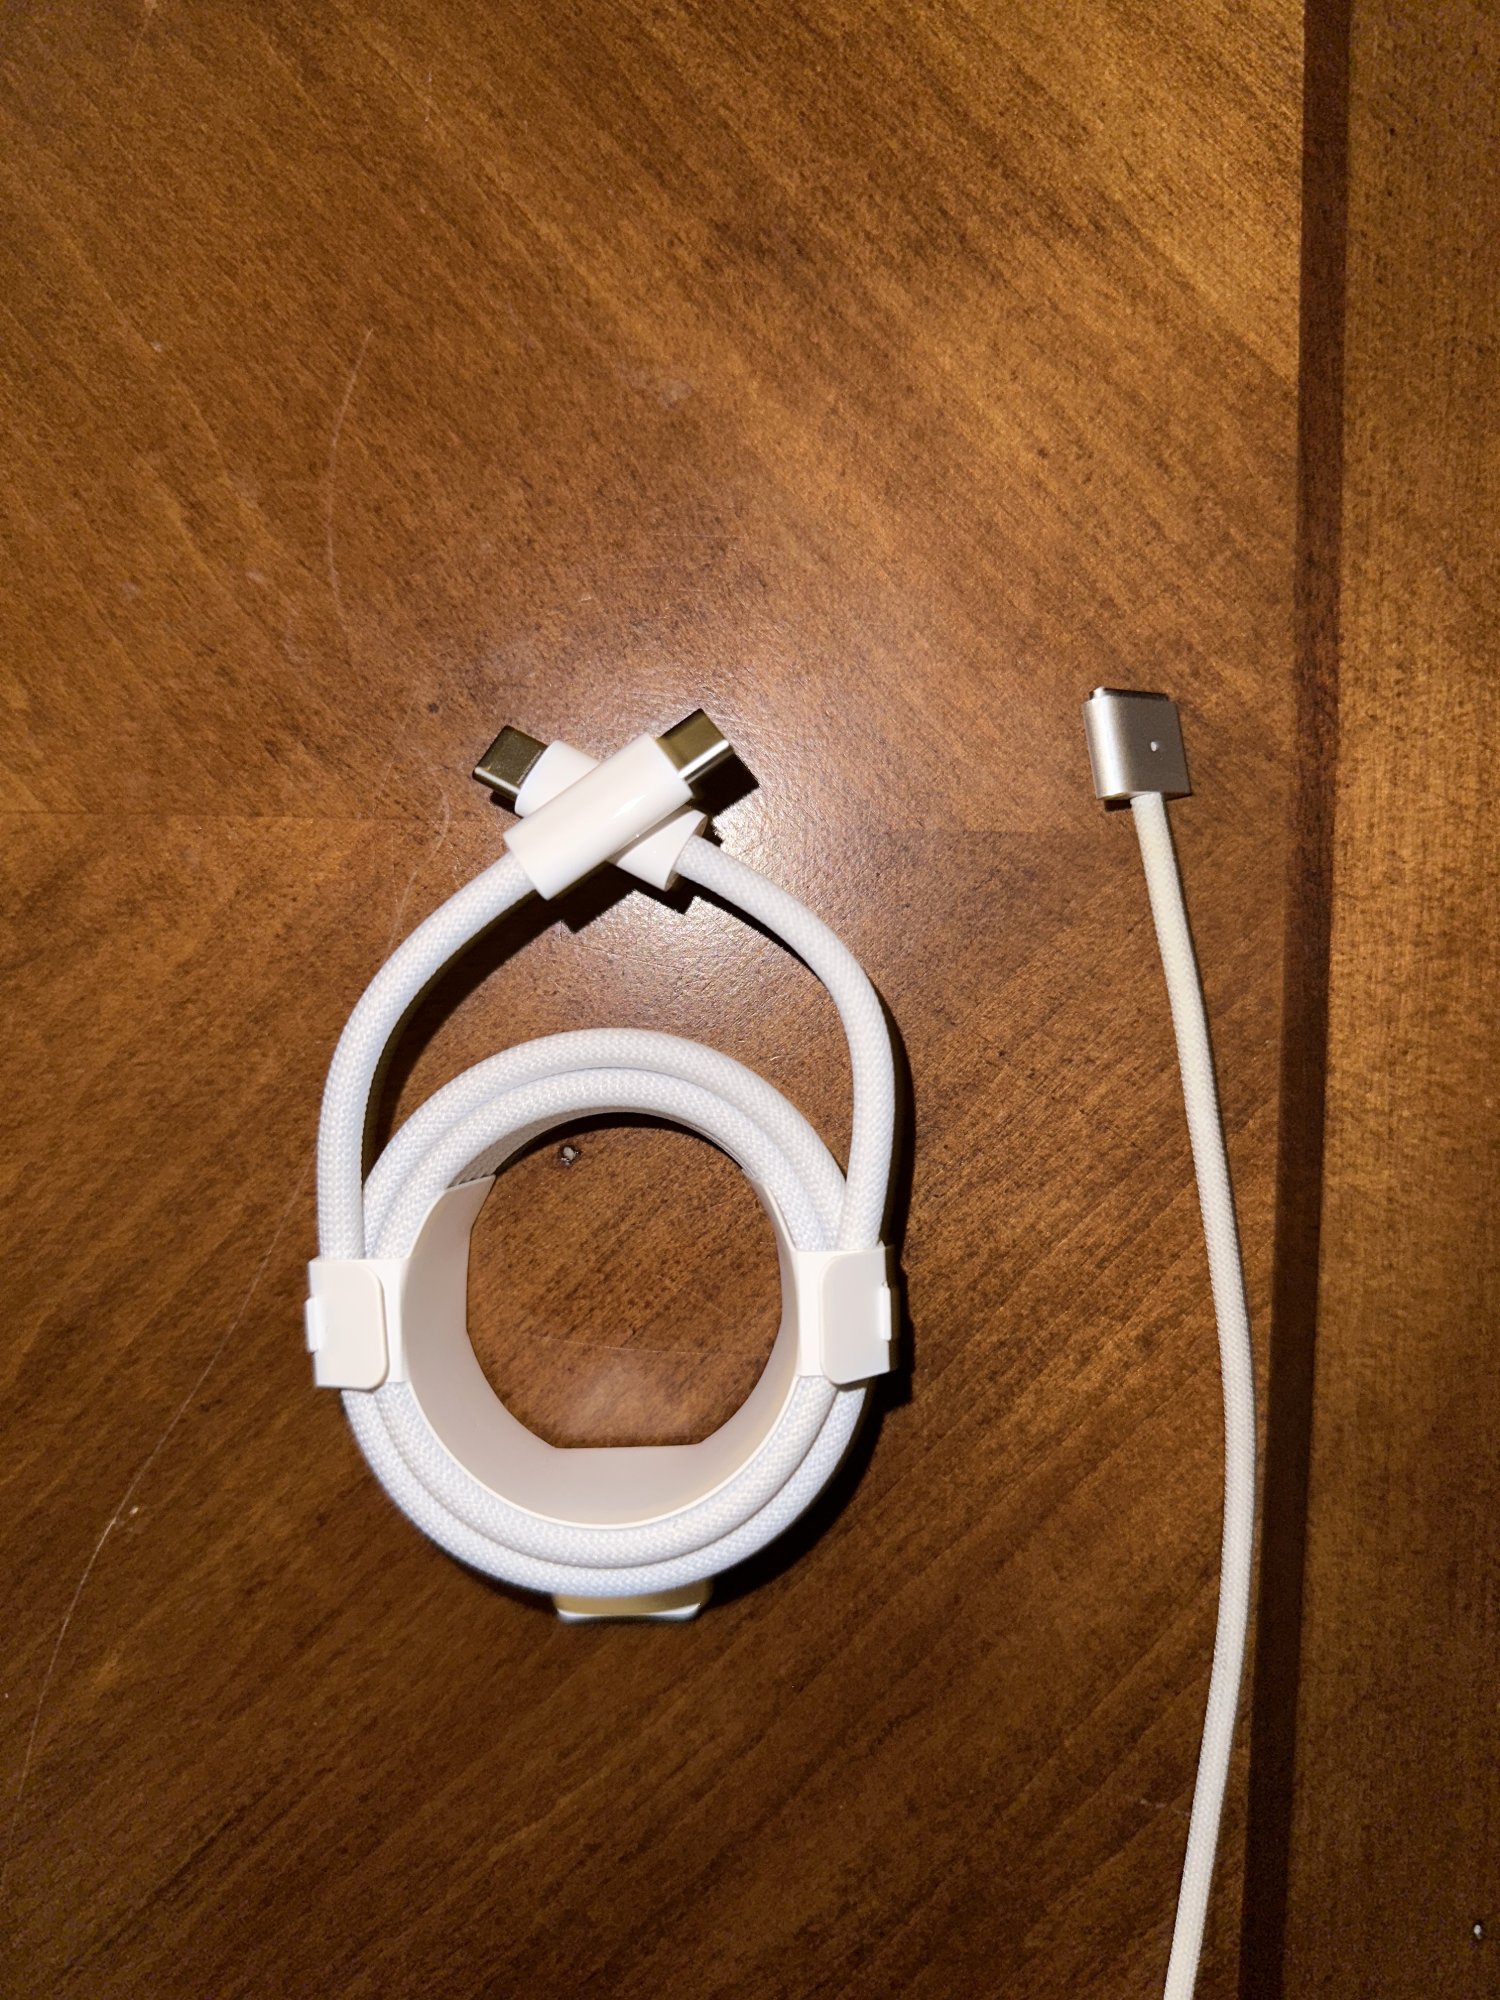 Apple Selling New 60W and 240W USB-C Woven Charge Cables - MacRumors